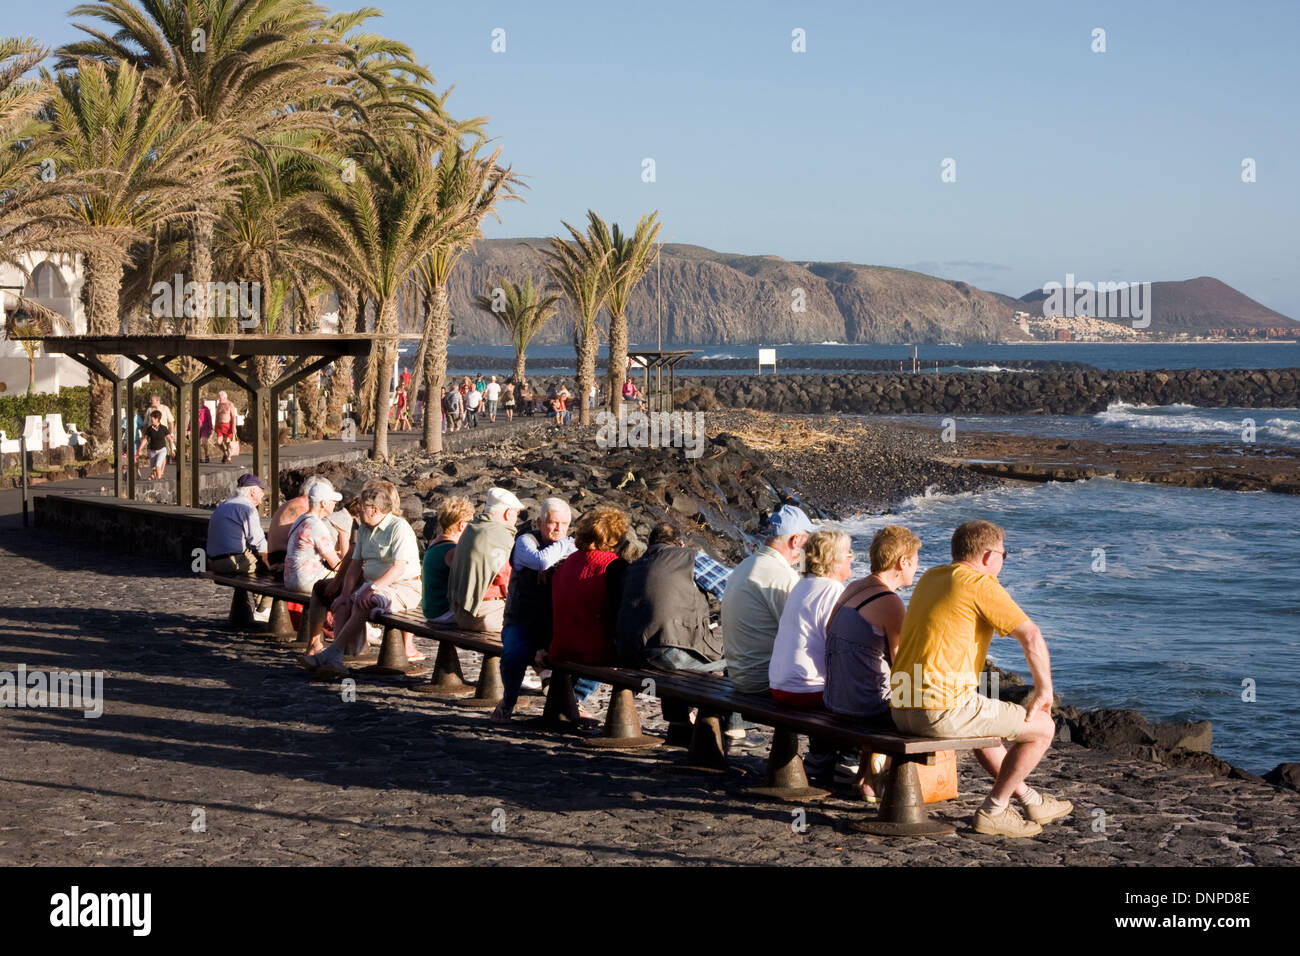 mature people sitting on bench looking out to sea, Playa del Camison, Tenerife, Spain Stock Photo